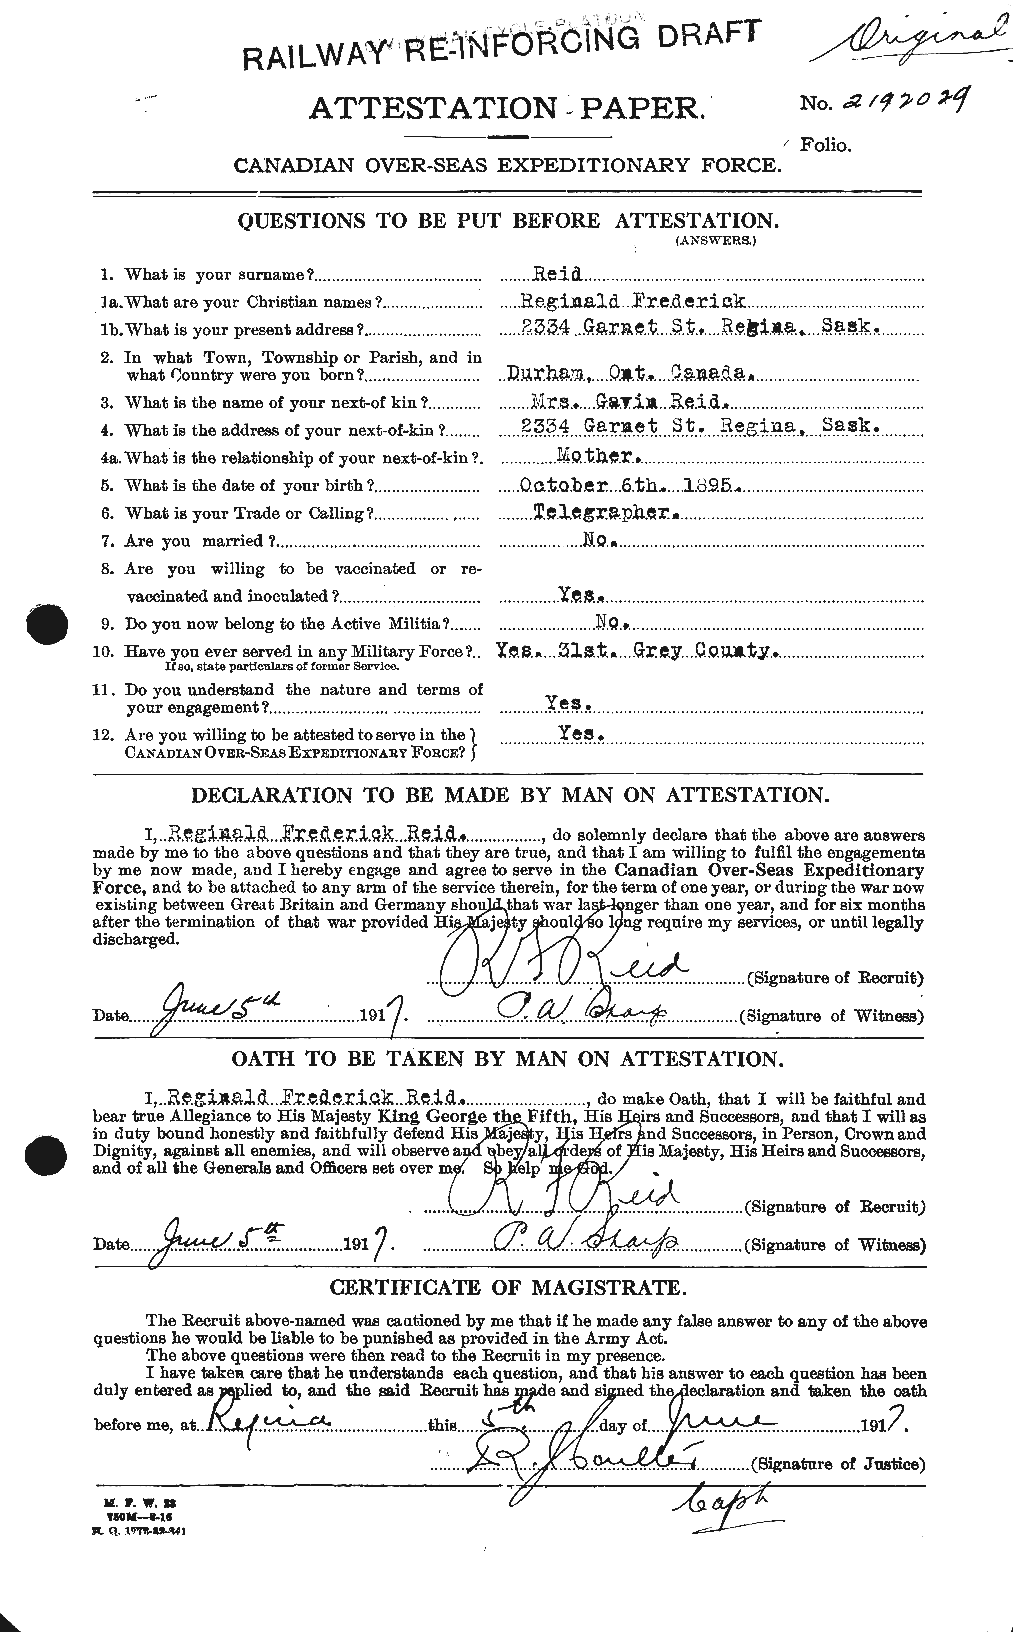 Personnel Records of the First World War - CEF 601856a